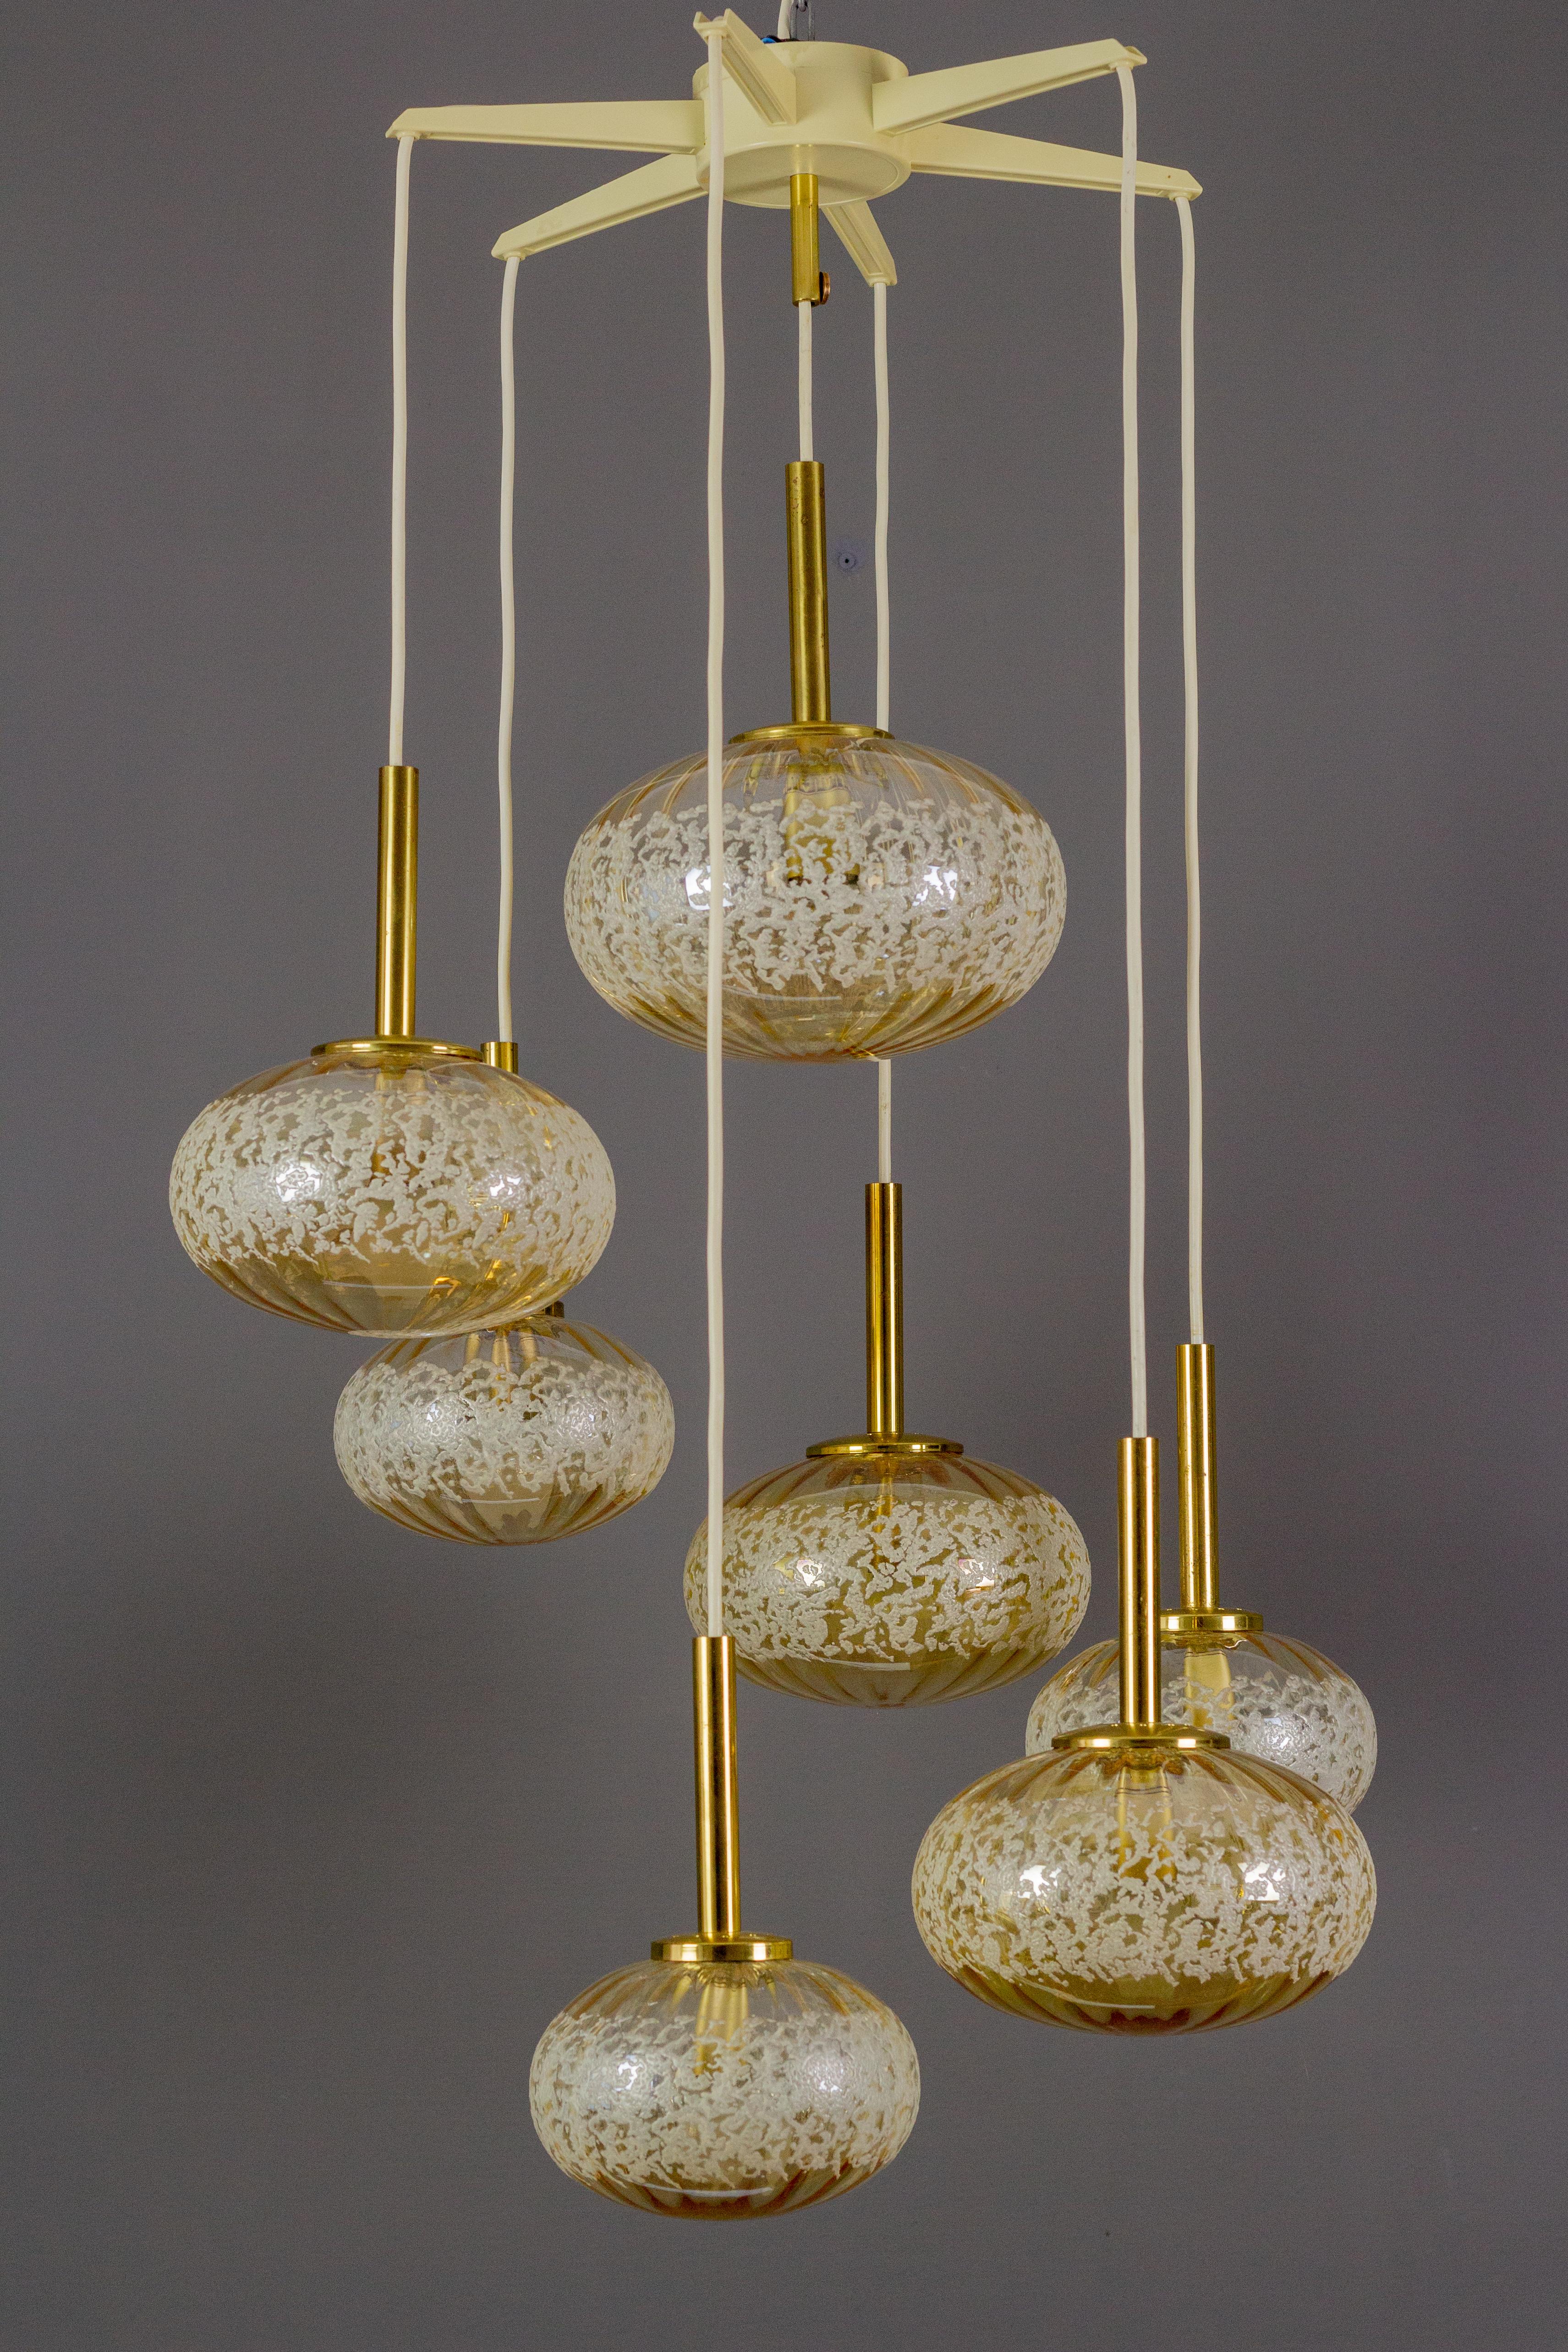 Beautiful German vintage cascading pendant light with seven very nice shaped cream color glass globes or spheres in different sizes - three smaller, three bigger, and one big glass globe. 
Six sockets for E14 size light bulbs and one socket for the